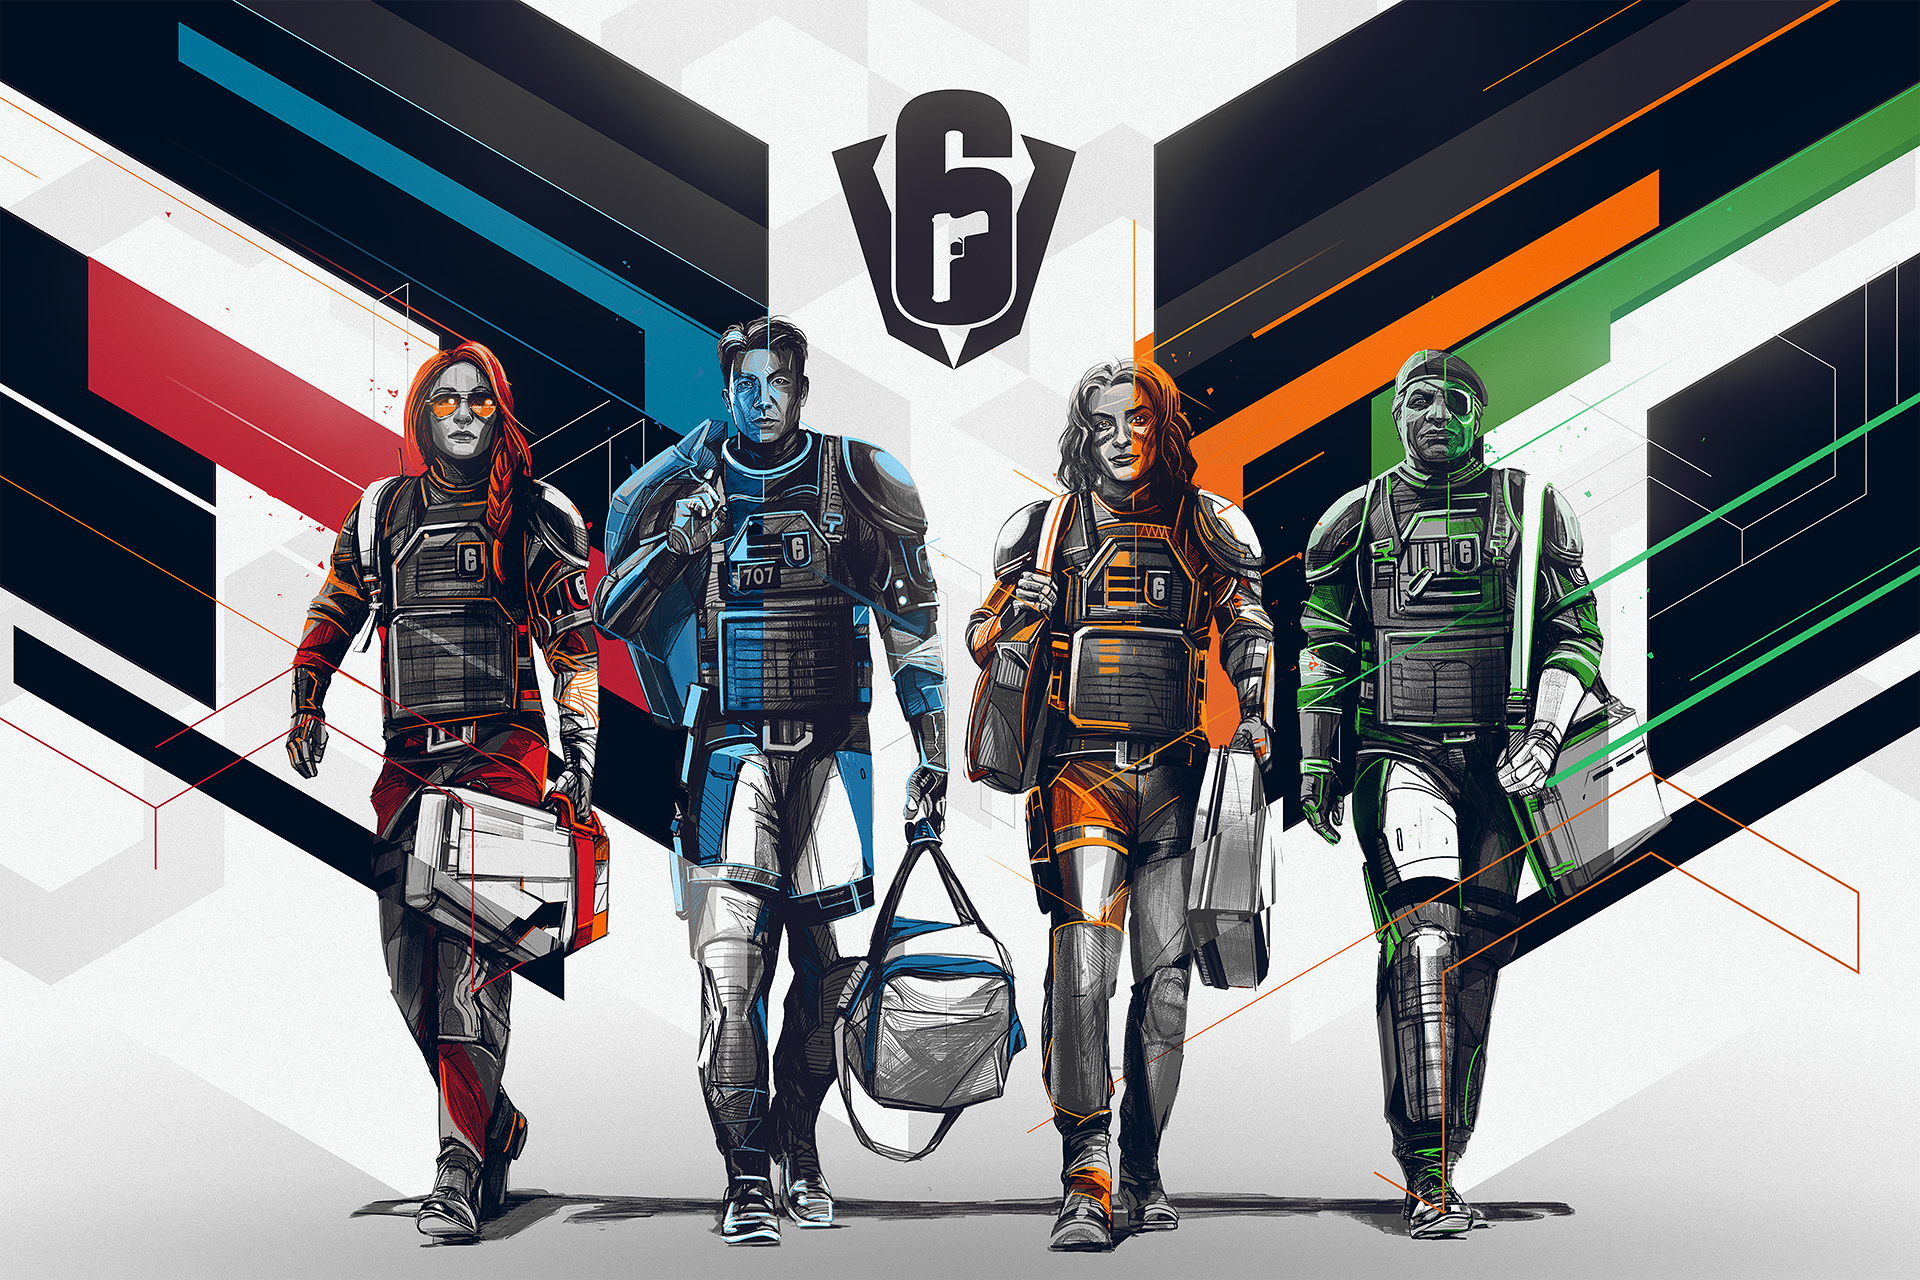 Rainbow Six Invitational Wallpaper Hd Games 4k Wallpapers Images Photos And Background